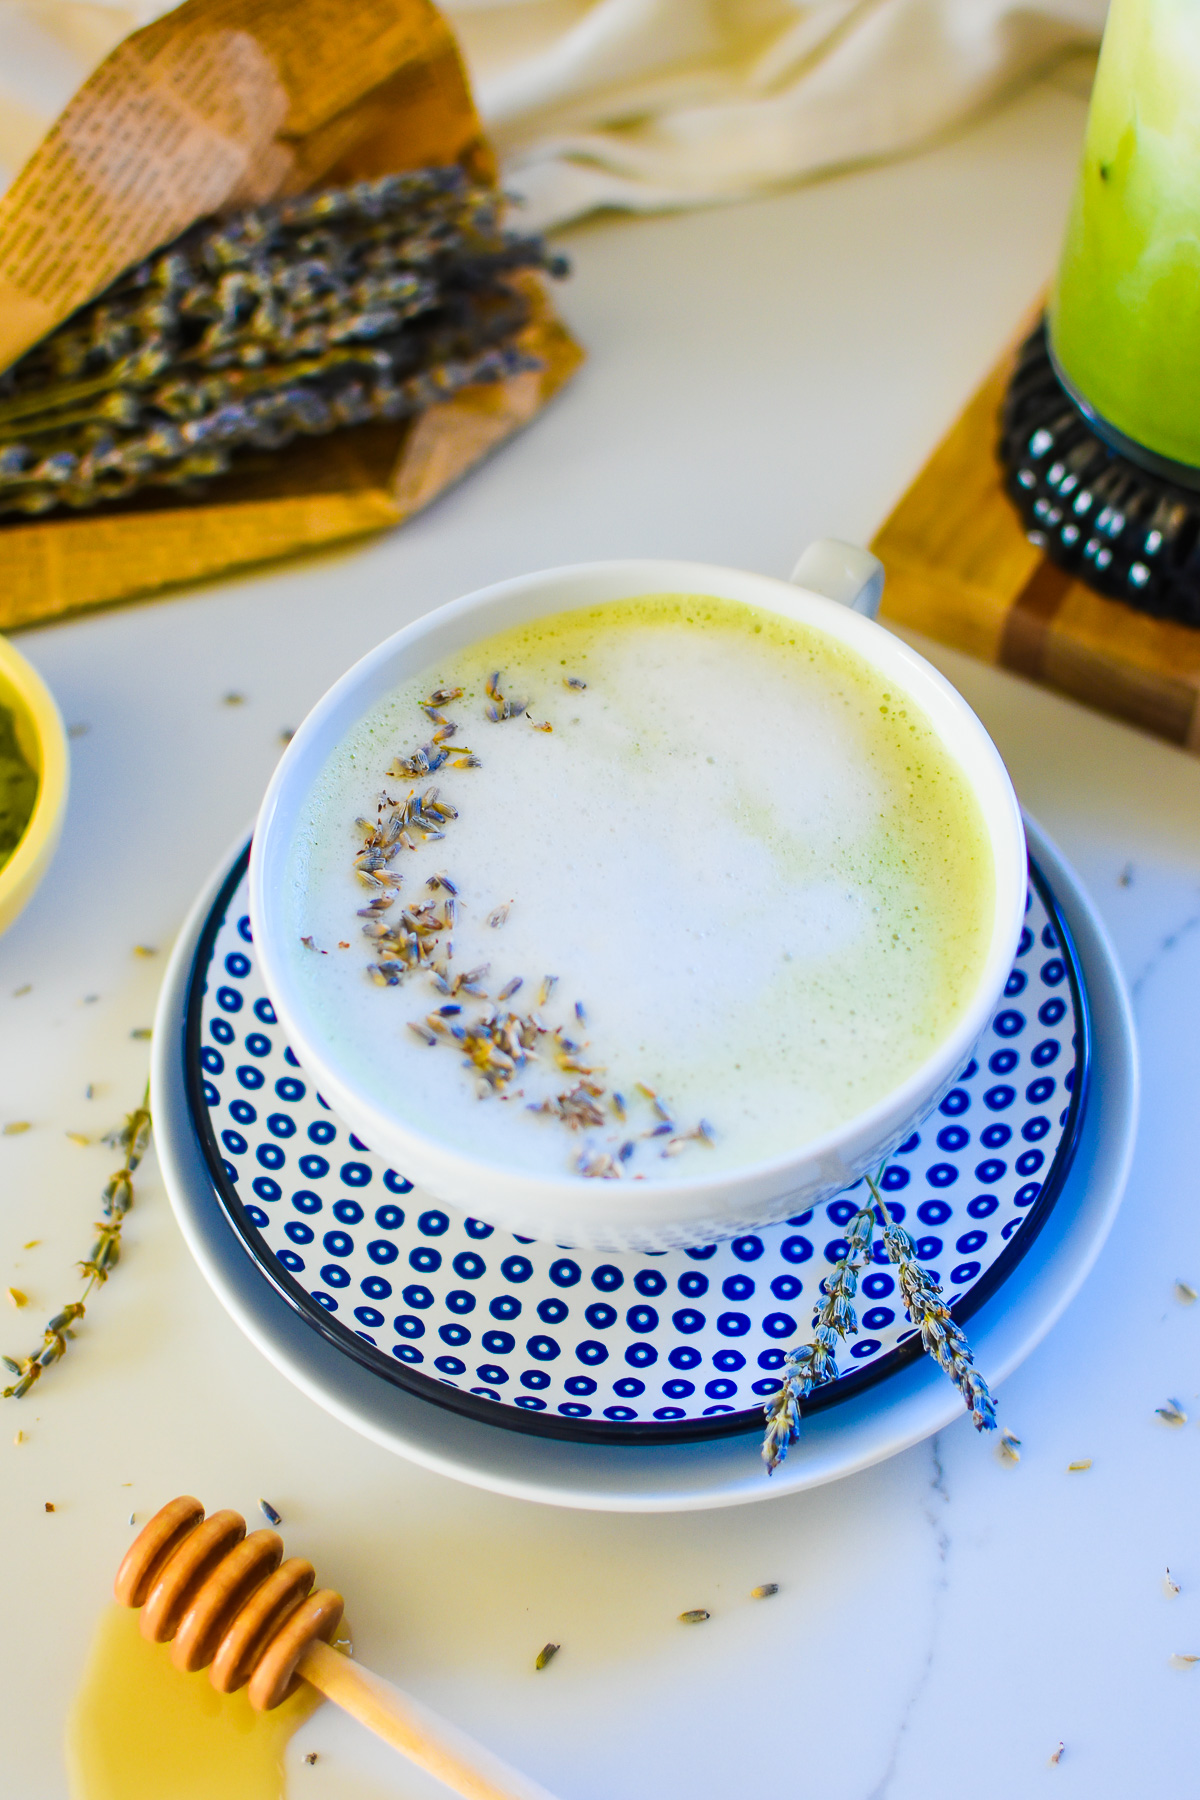 DIY honey lavender matcha latte made with almond milk and served in white teacup on blue and white sauces.